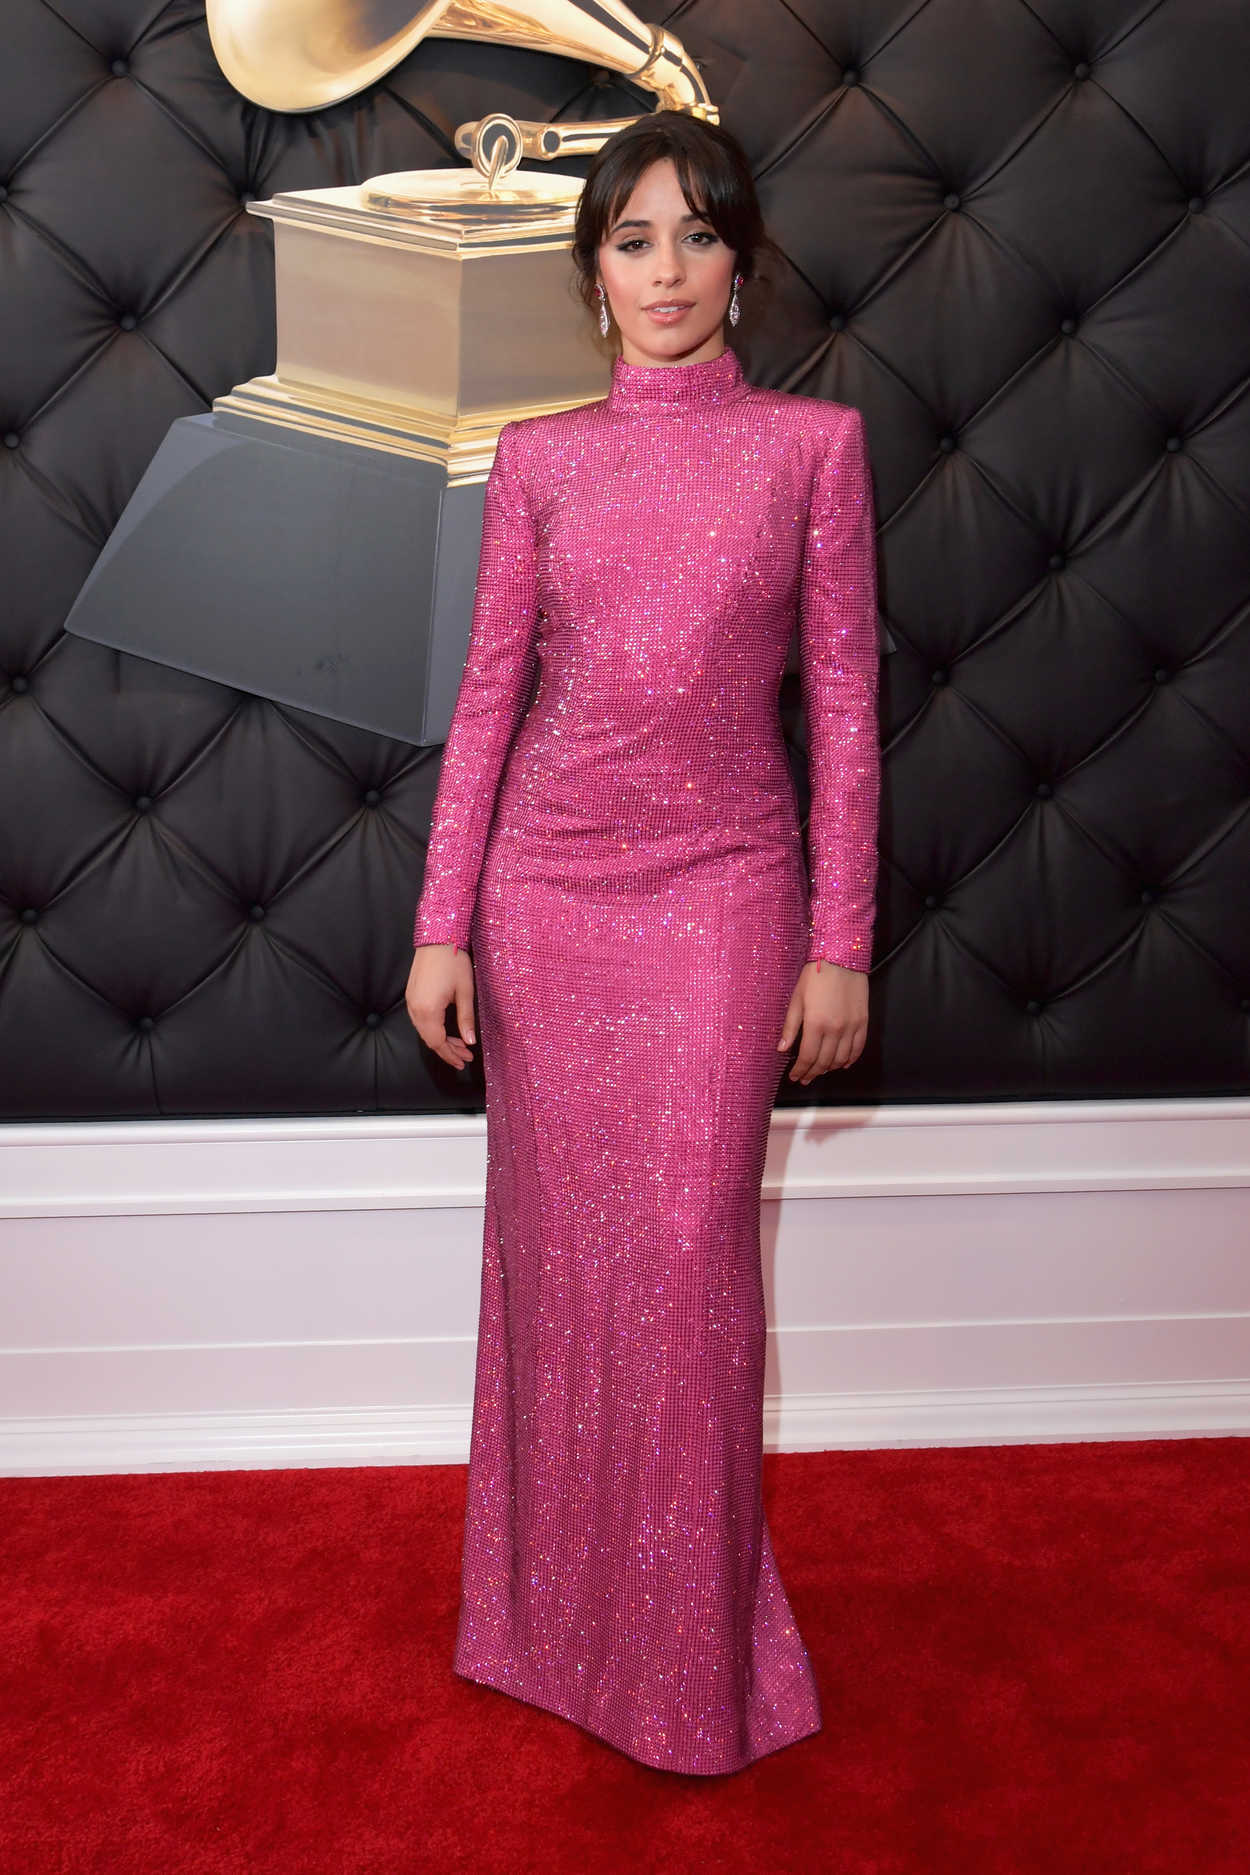 Camila Cabello Attends the 61st Annual Grammy Awards 2019 at the Staples Center in Los ...